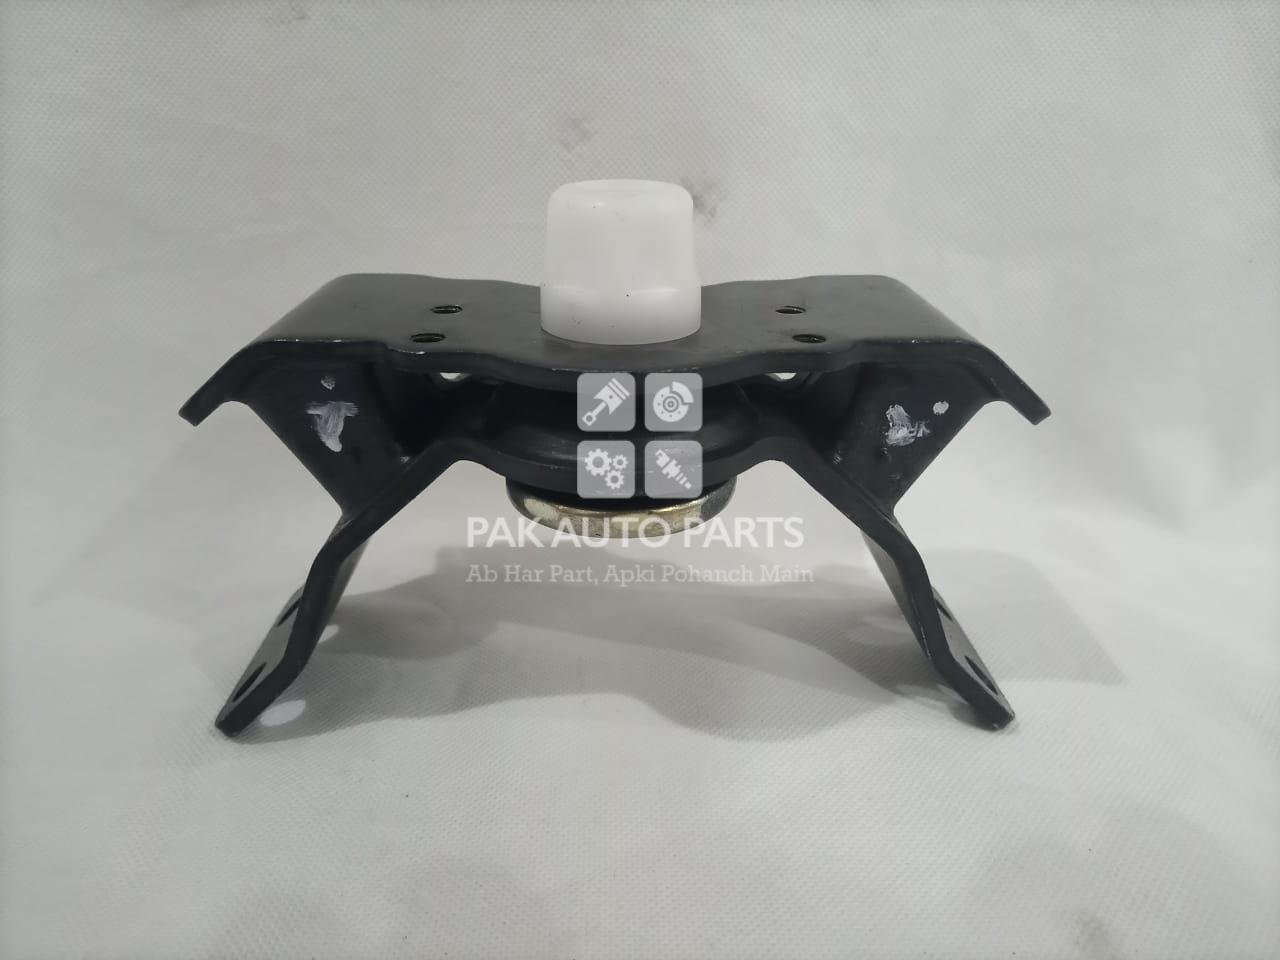 Picture of Toyota Hilux Surf 2003-2005 Gear Mount 1KD-FTV